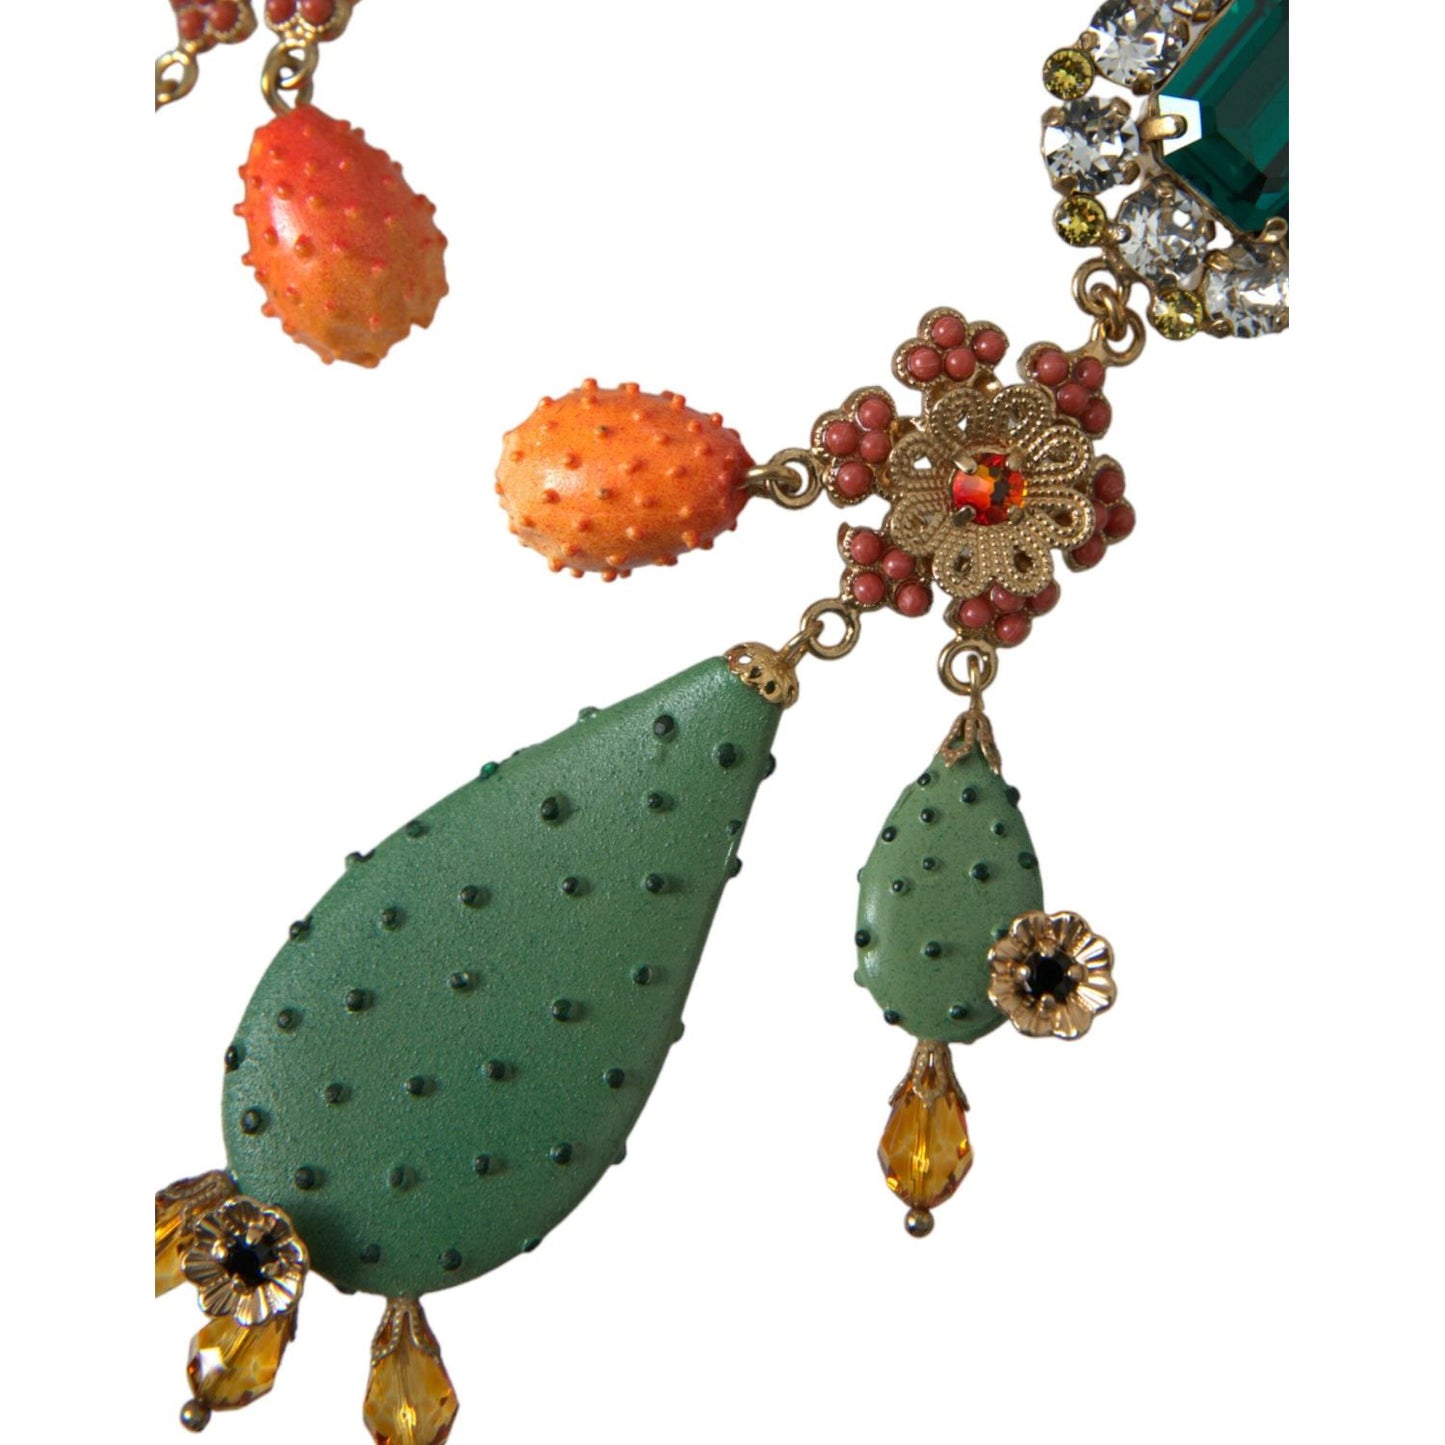 Green Cactus Crystal Clip On Jewelry Dangling Earrings Dolce & Gabbana